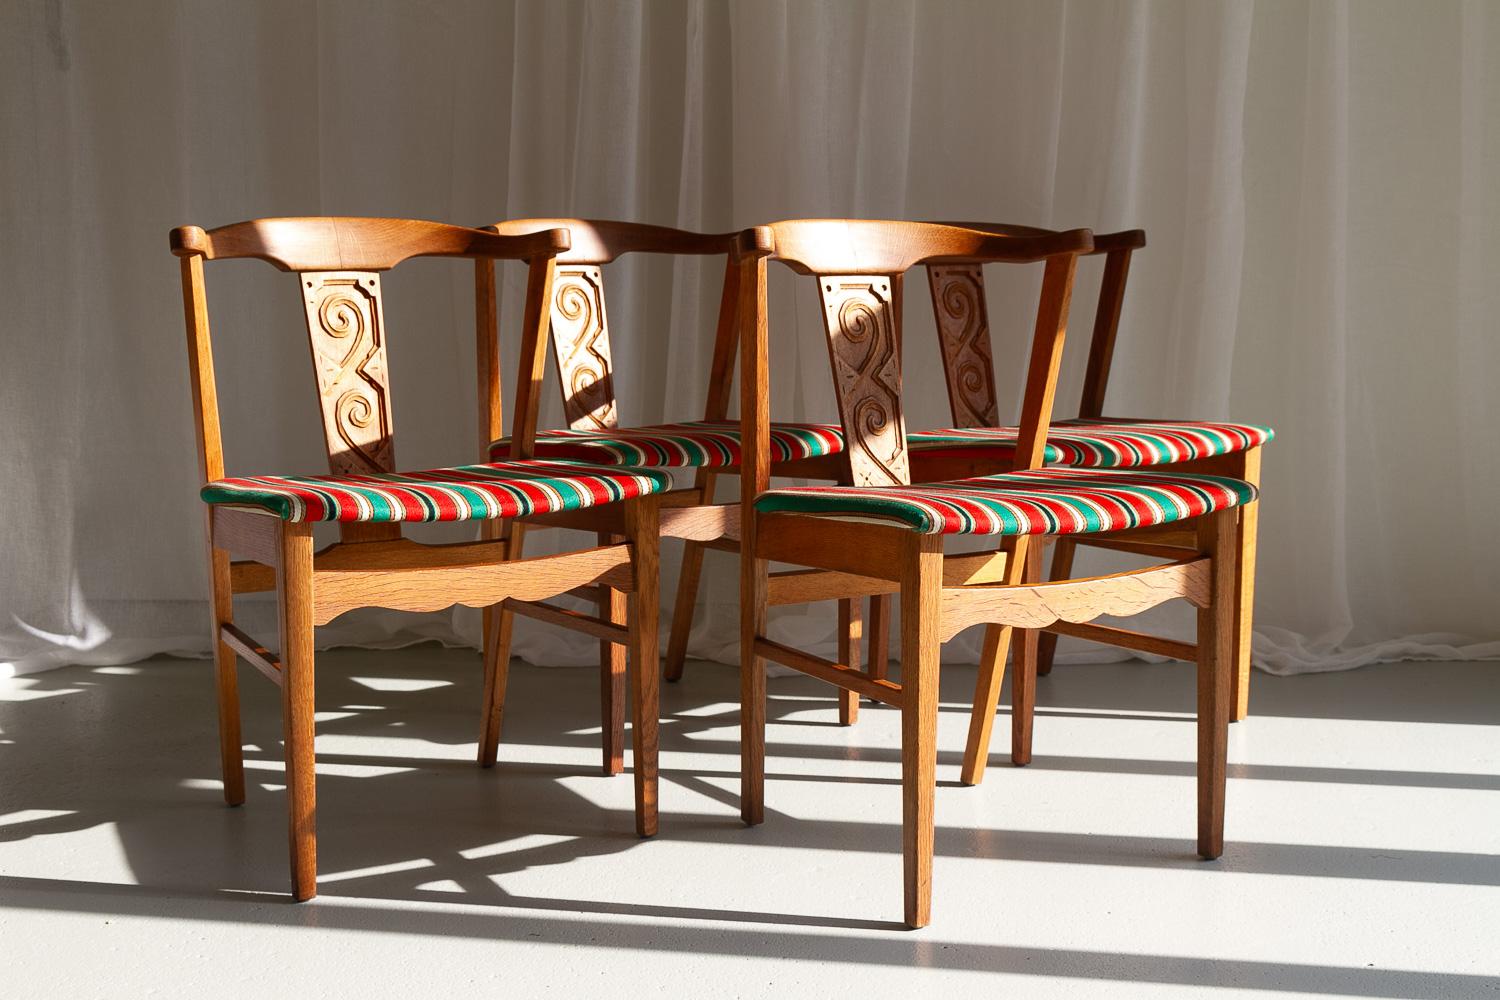 Mid-20th Century Vintage Danish Oak Dining Chairs by Kjærnulf, 1960s. Set of 4. For Sale